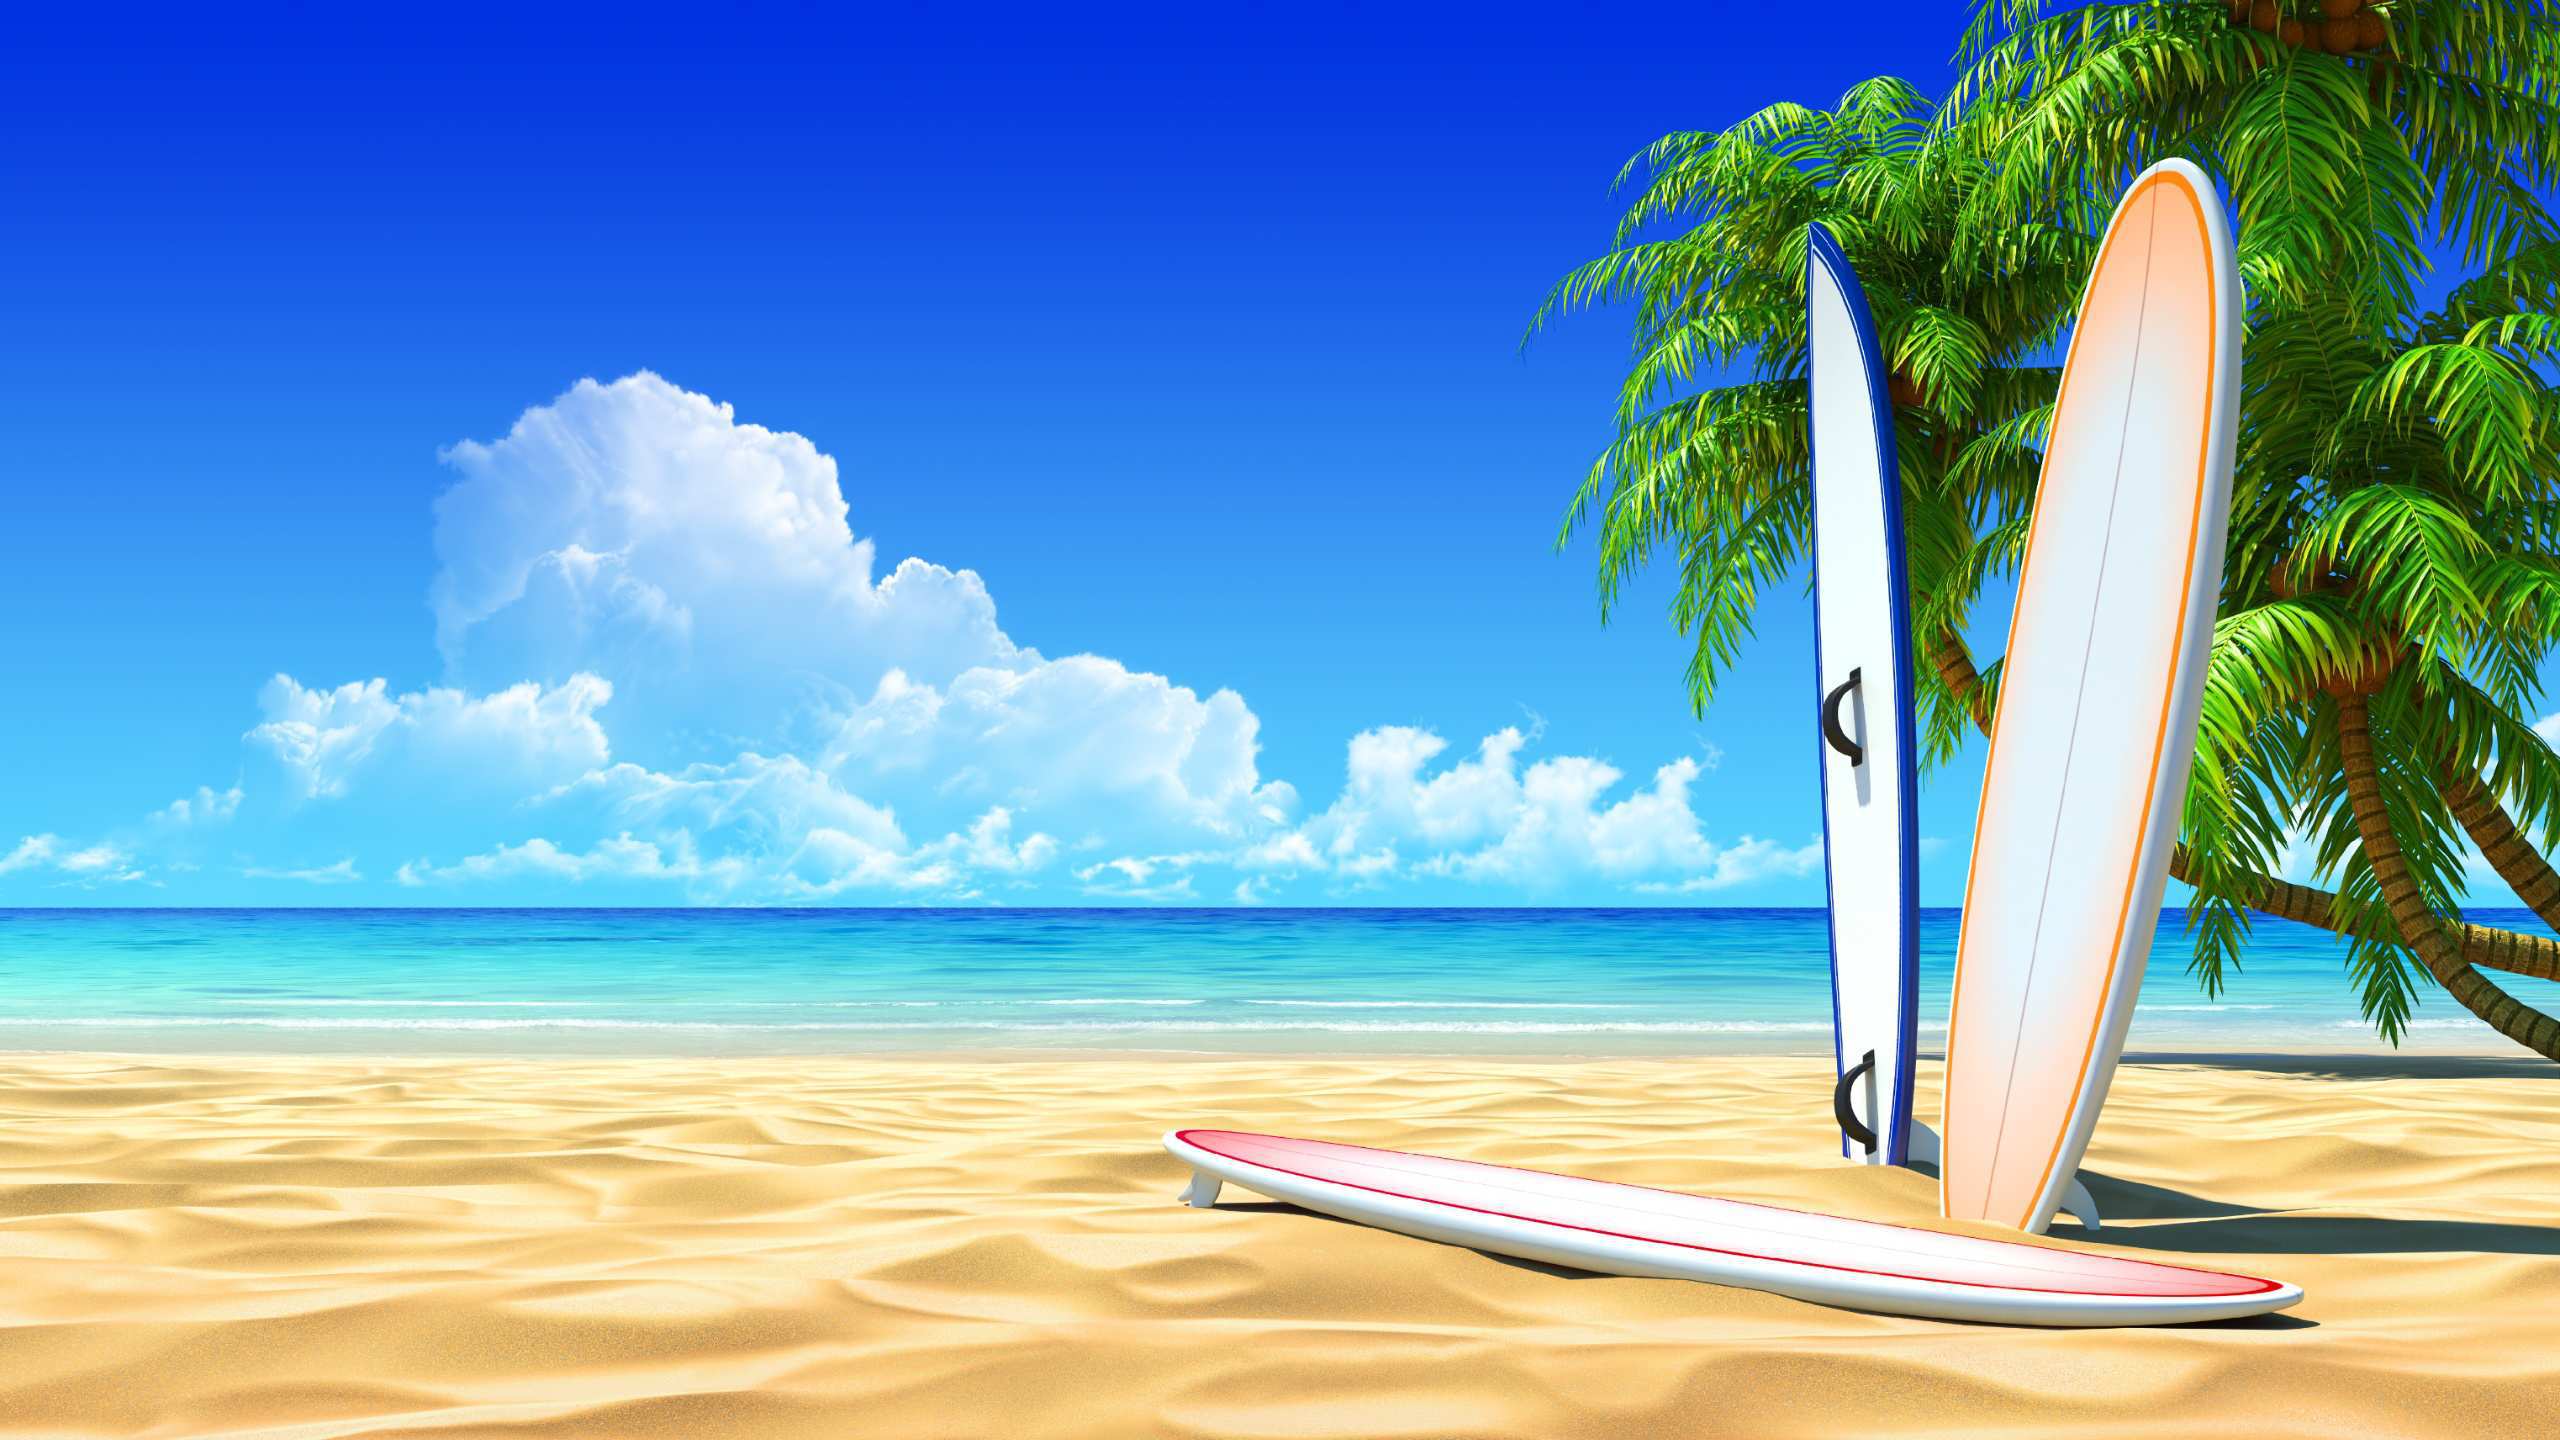 Surf Board On The Beach Wallpaper Wide Collections